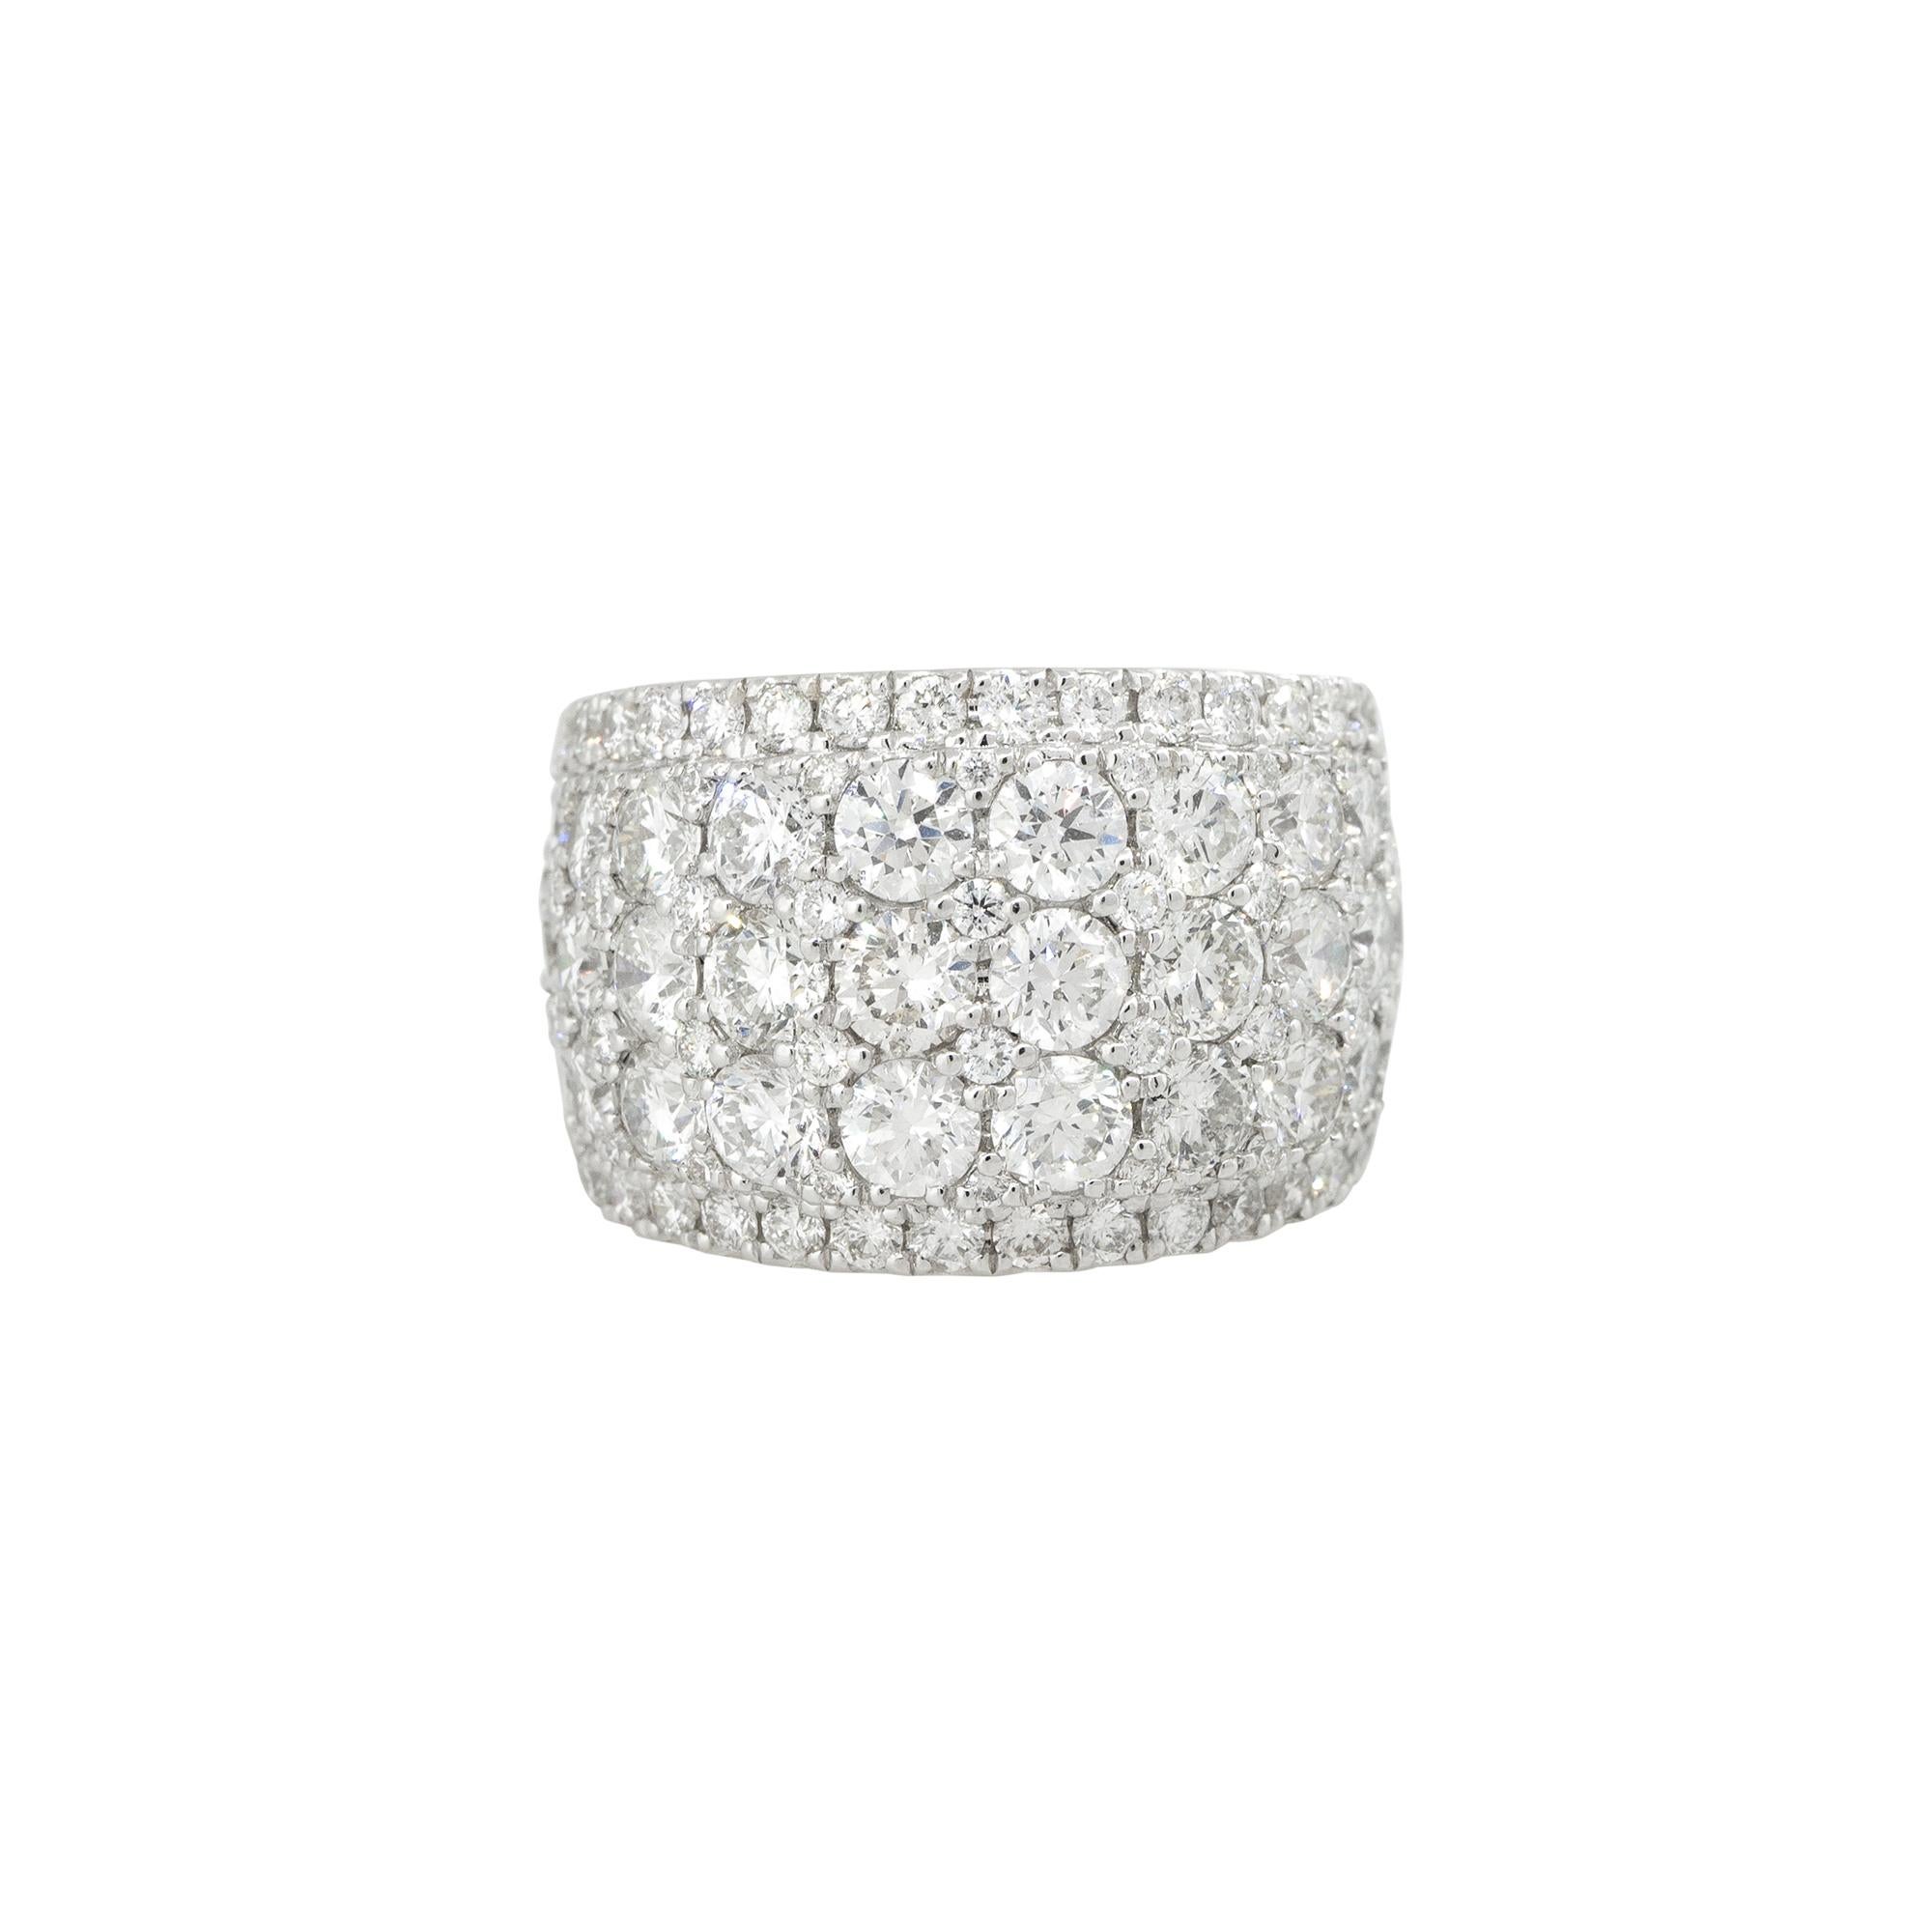 18k White Gold 5.25ctw Wide Pave Diamond Band
Style: Women's Pave Diamond Ring
Material: 18k White Gold
Diamond Details: Approximately 5.25ctw of Pave set, Round Brilliant Diamonds. The band has larger stones with smaller stones set within and along